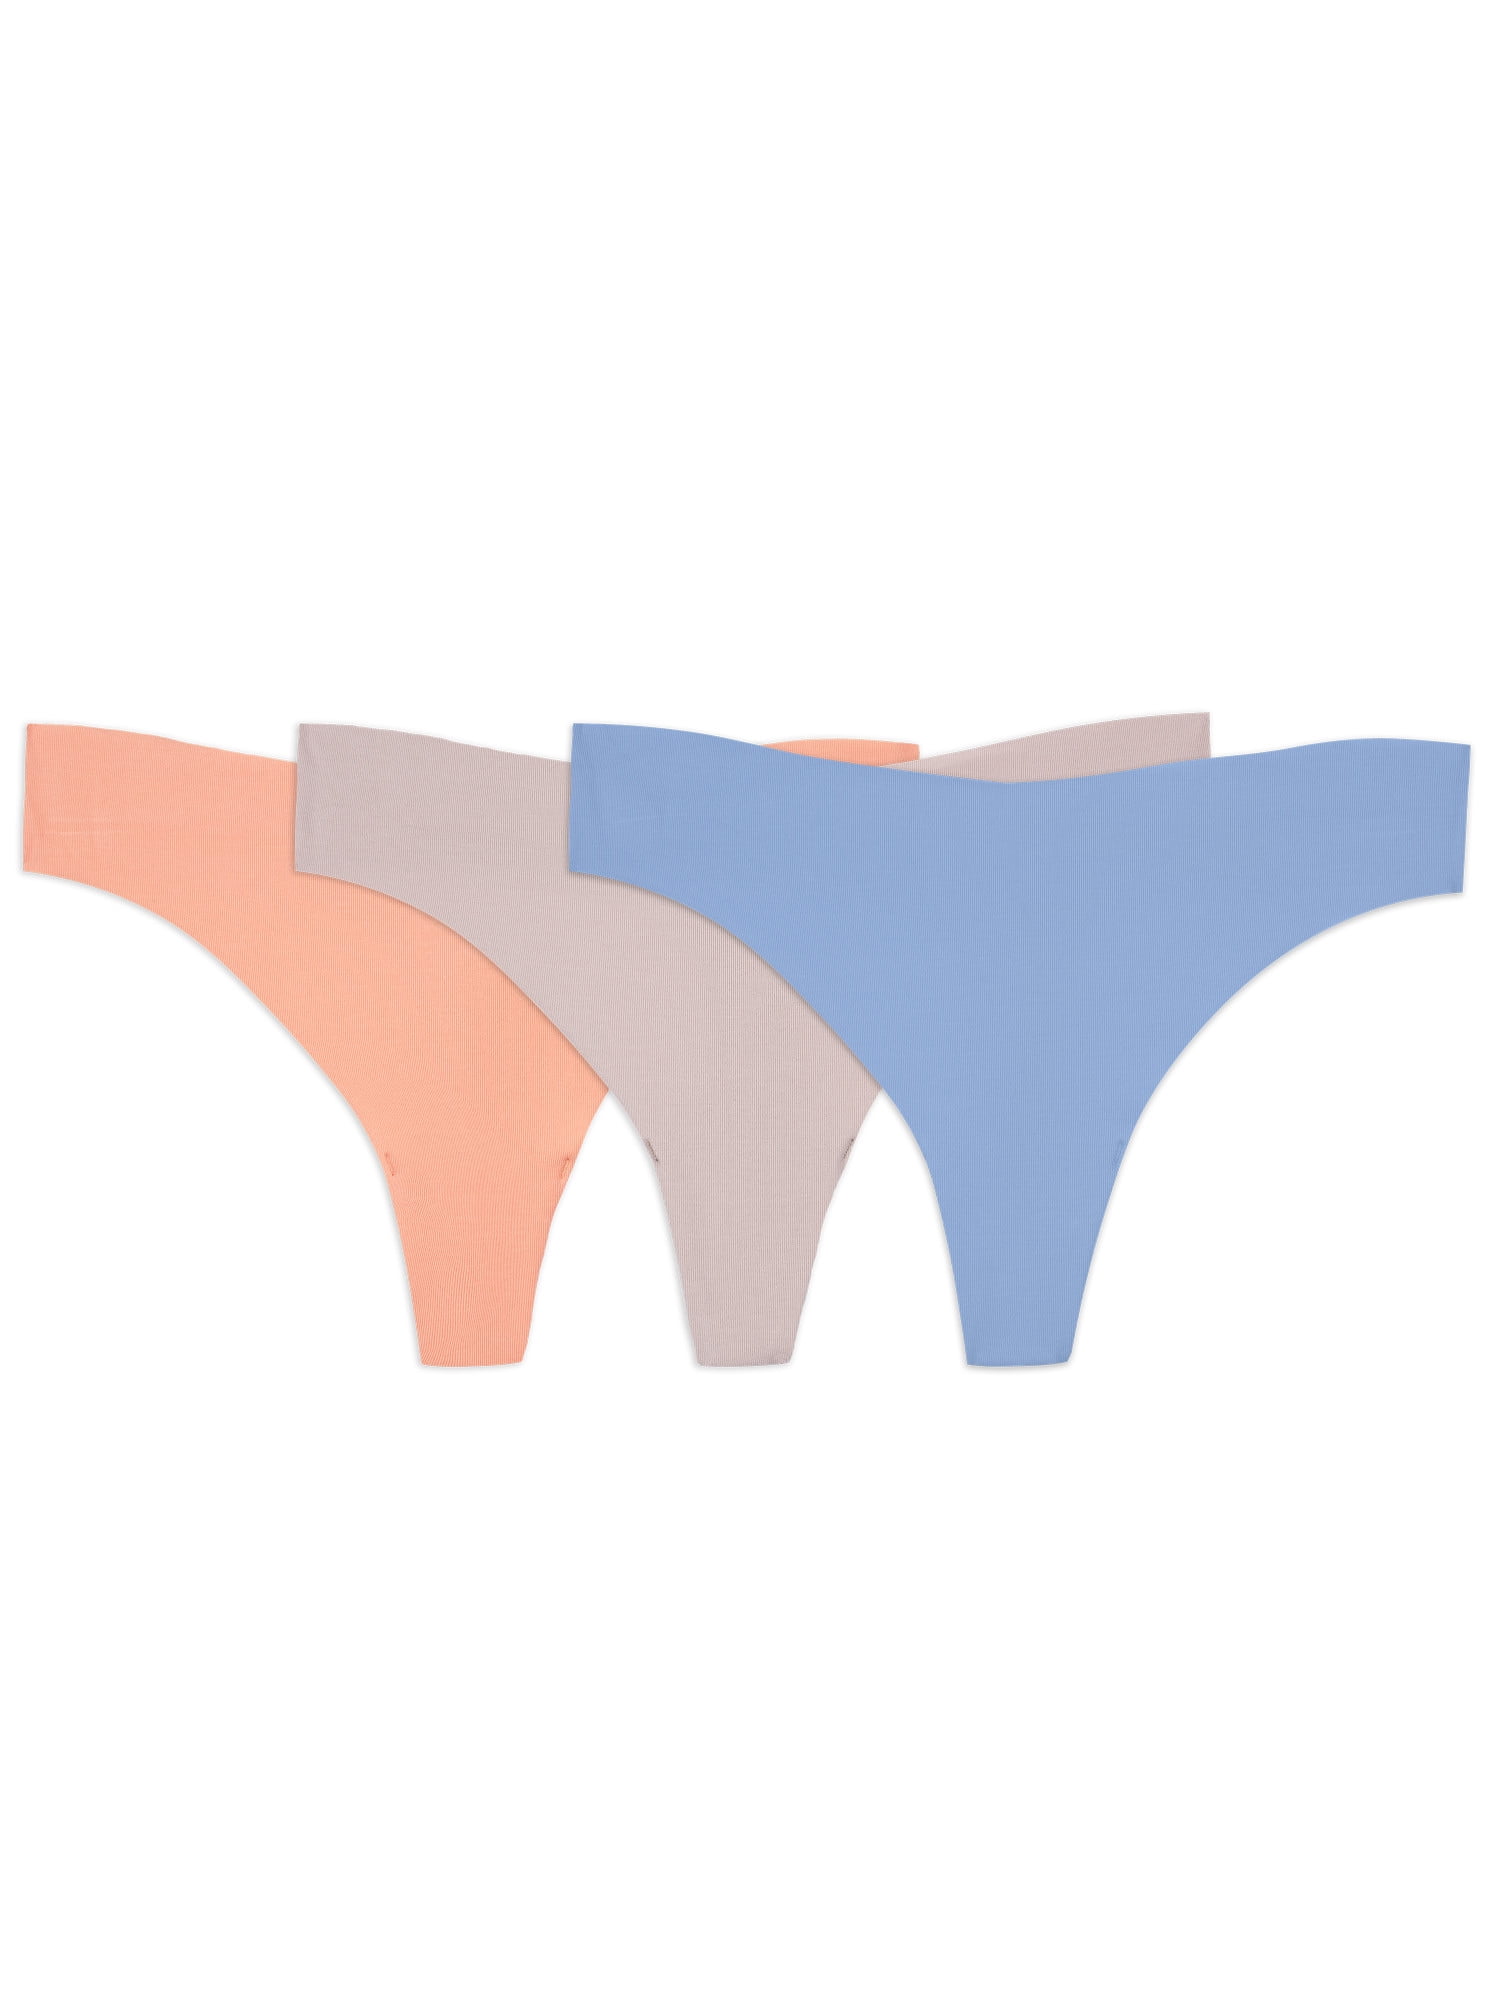 Fruit of the Loom Women's No Show Thong Underwear, 3 Pack, Sizes 5